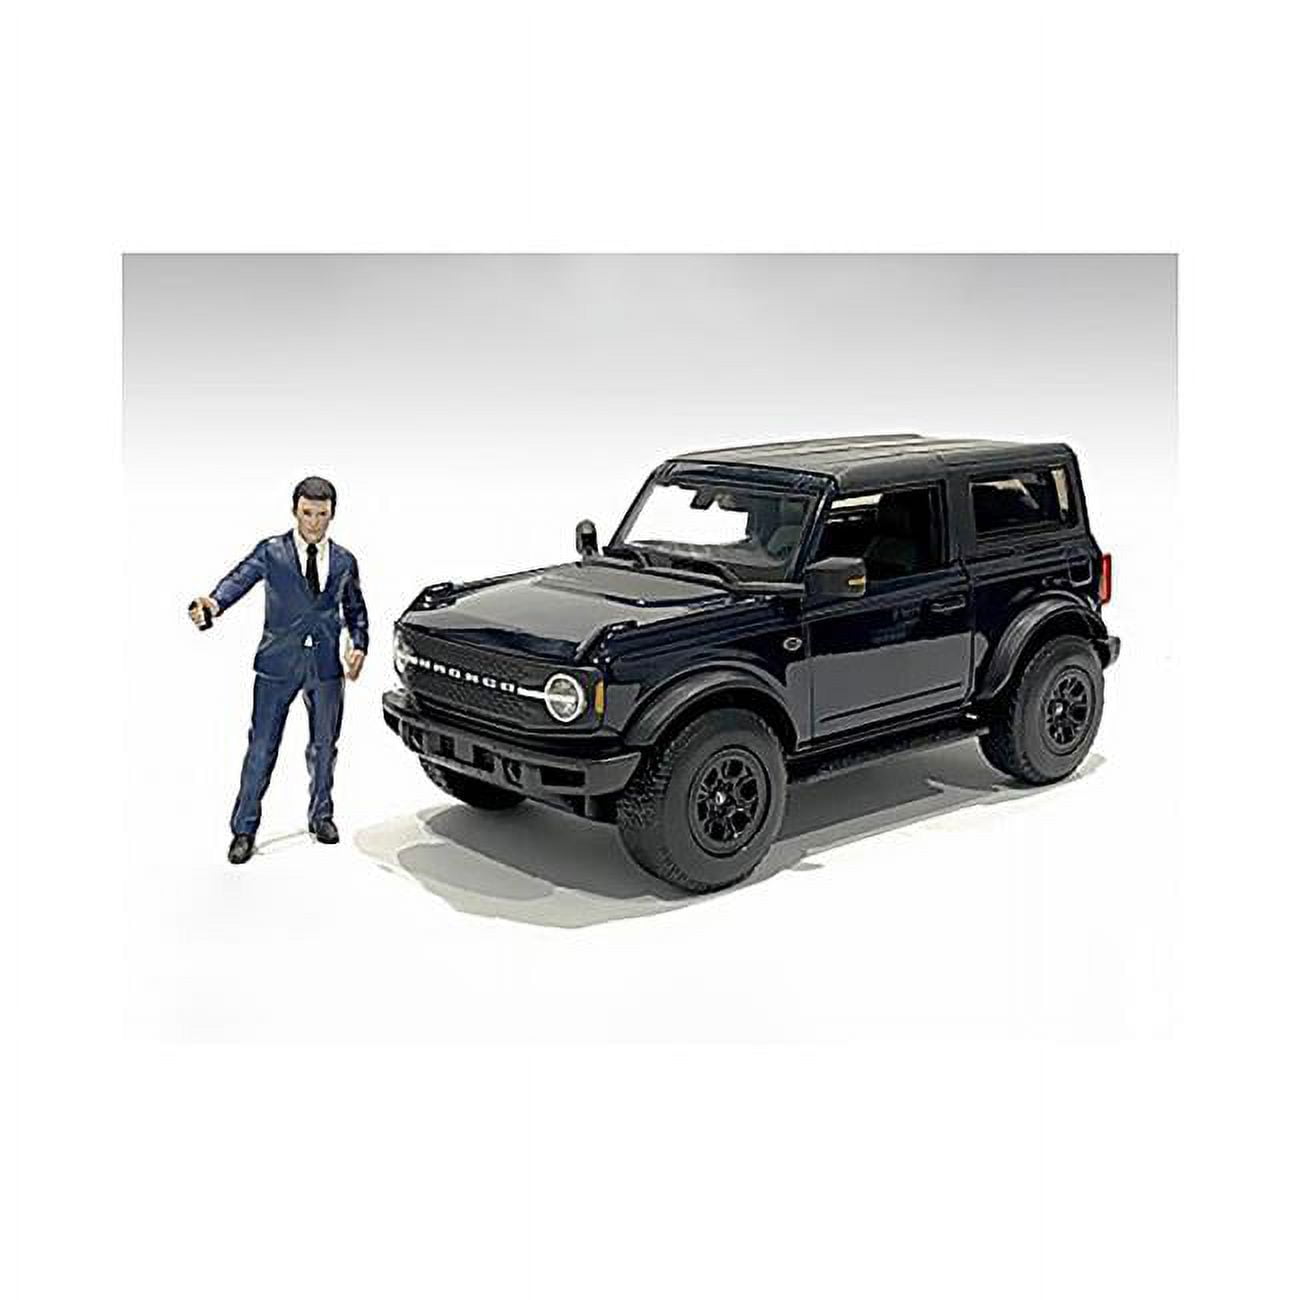 Picture of American Diorama AD76407 1-24 Scale The Dealership Male Salesperson Figurine for Model